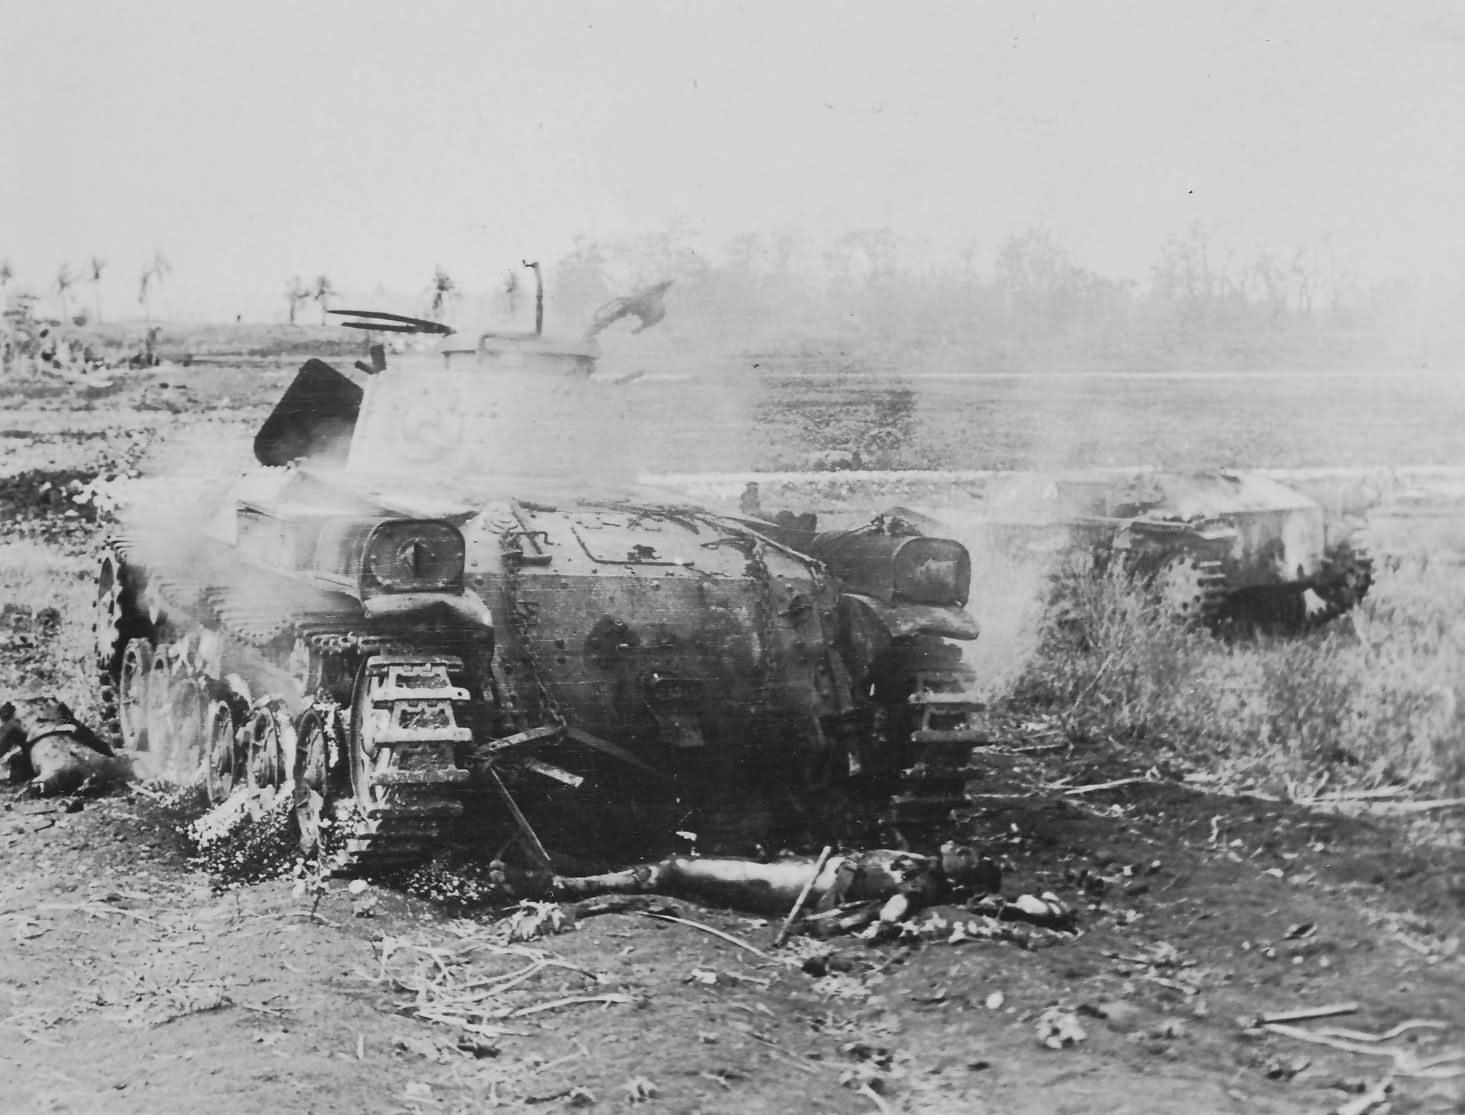 The charred remnants of a Japanese Type 97 Chi-Ha Tank